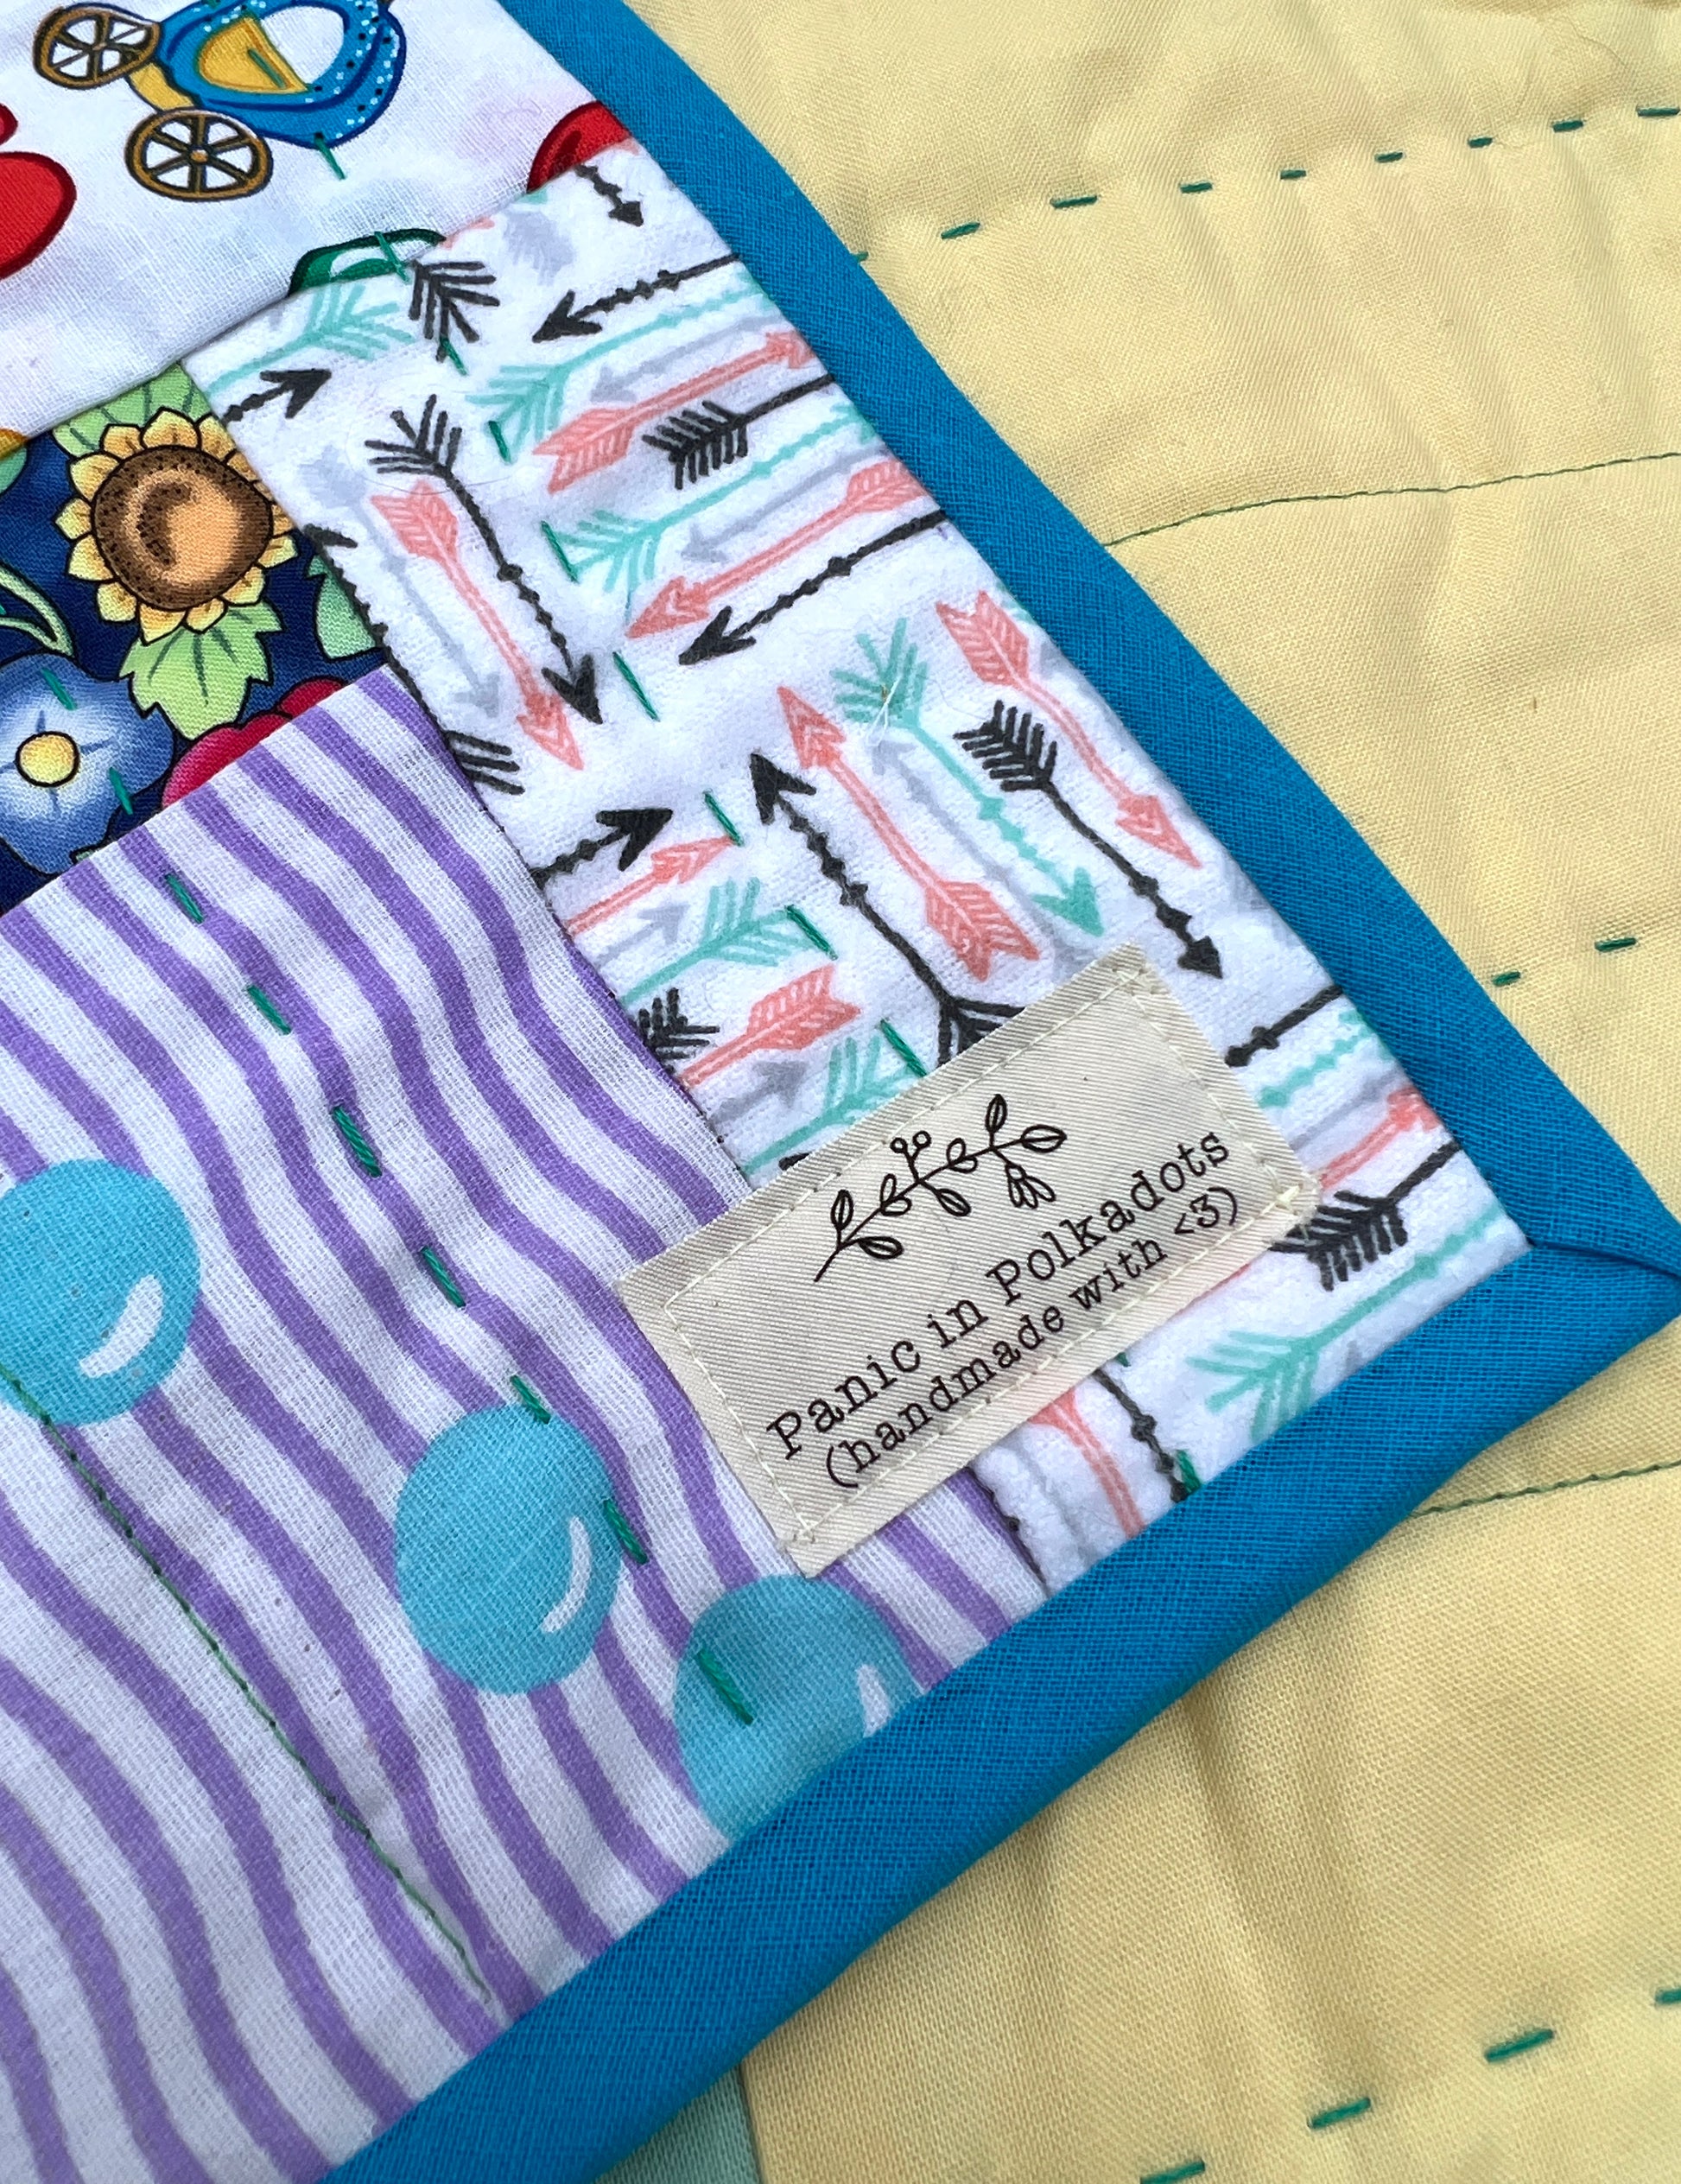 little mermaid baby quilt corner detail, with Panic in Polkadots label